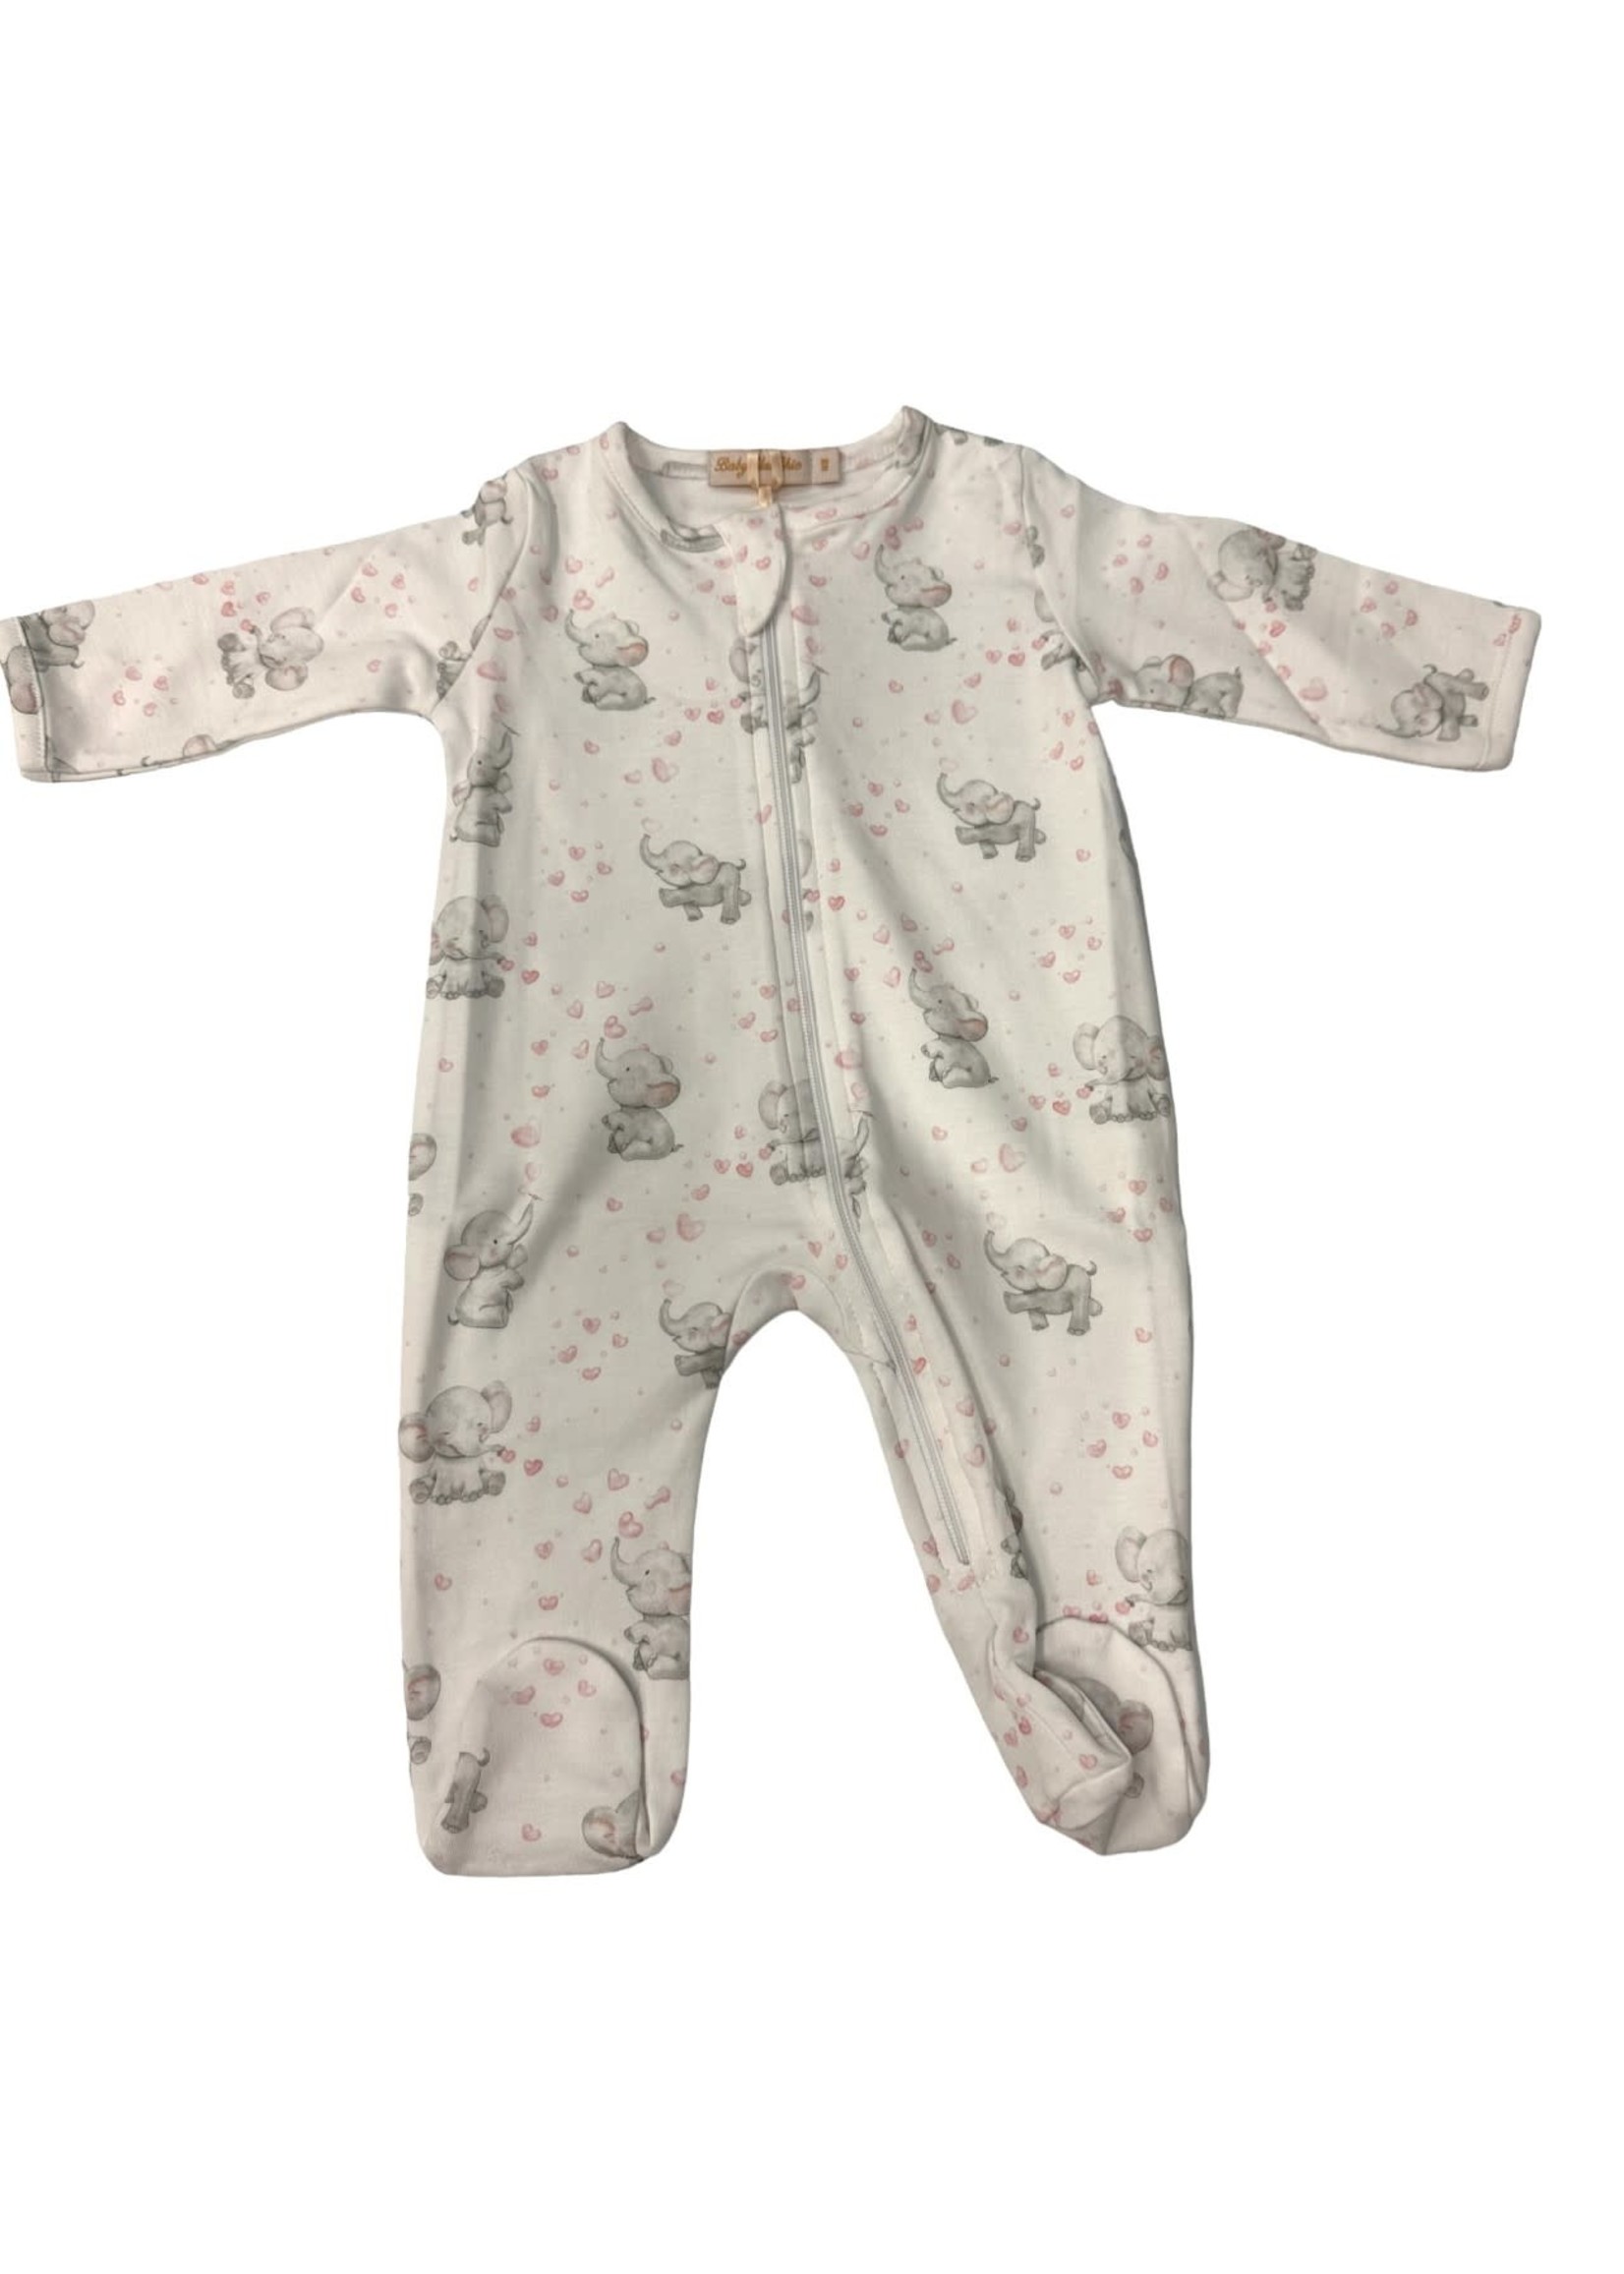 Baby Club Chic Bubbly Elephant Pink Zipper Footie